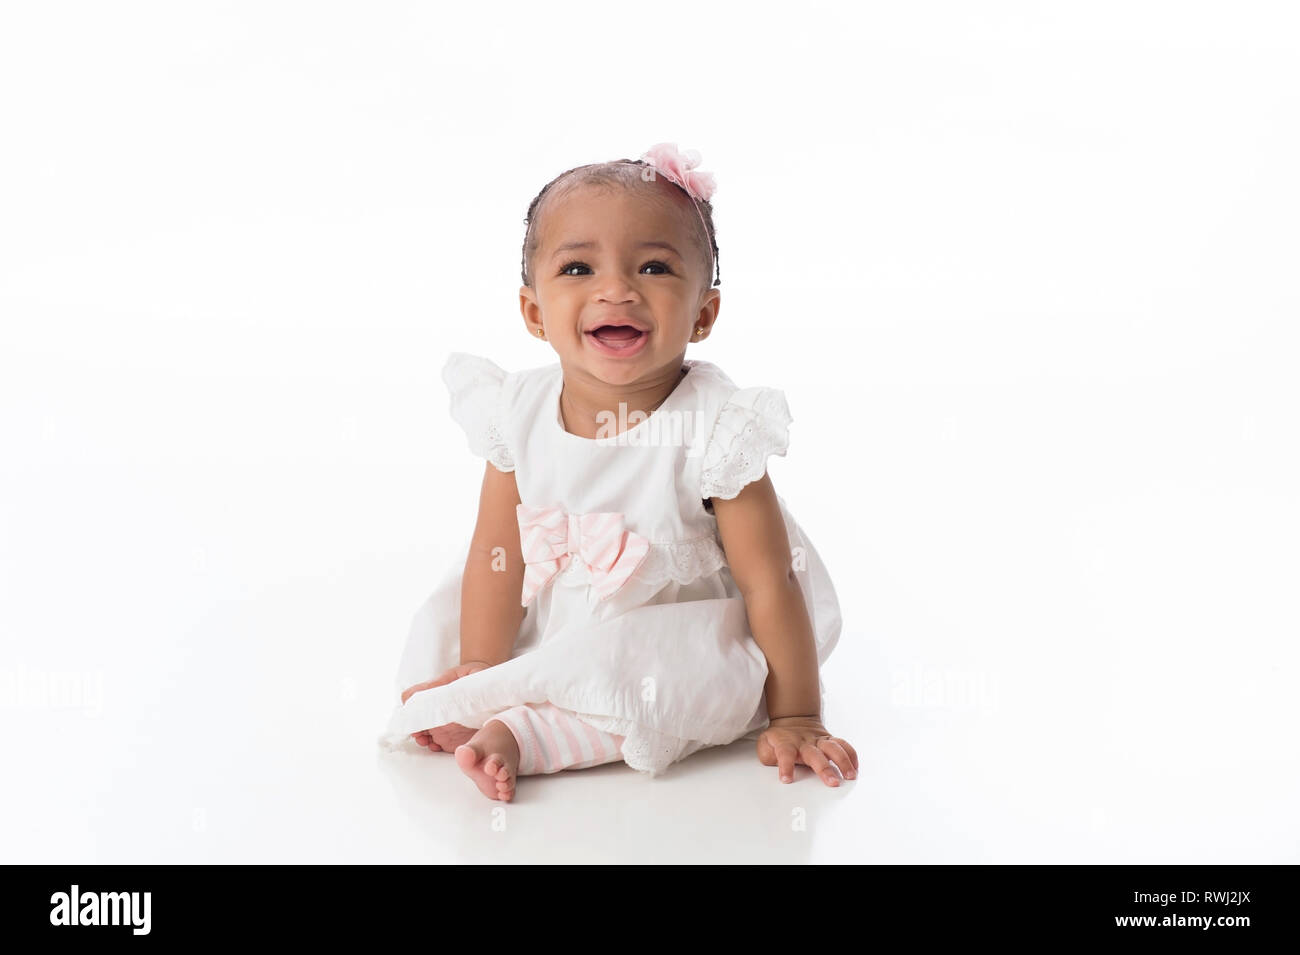 A smiling six month old baby girl wearing a white dress. She is sitting on a white, seamless background. Stock Photo